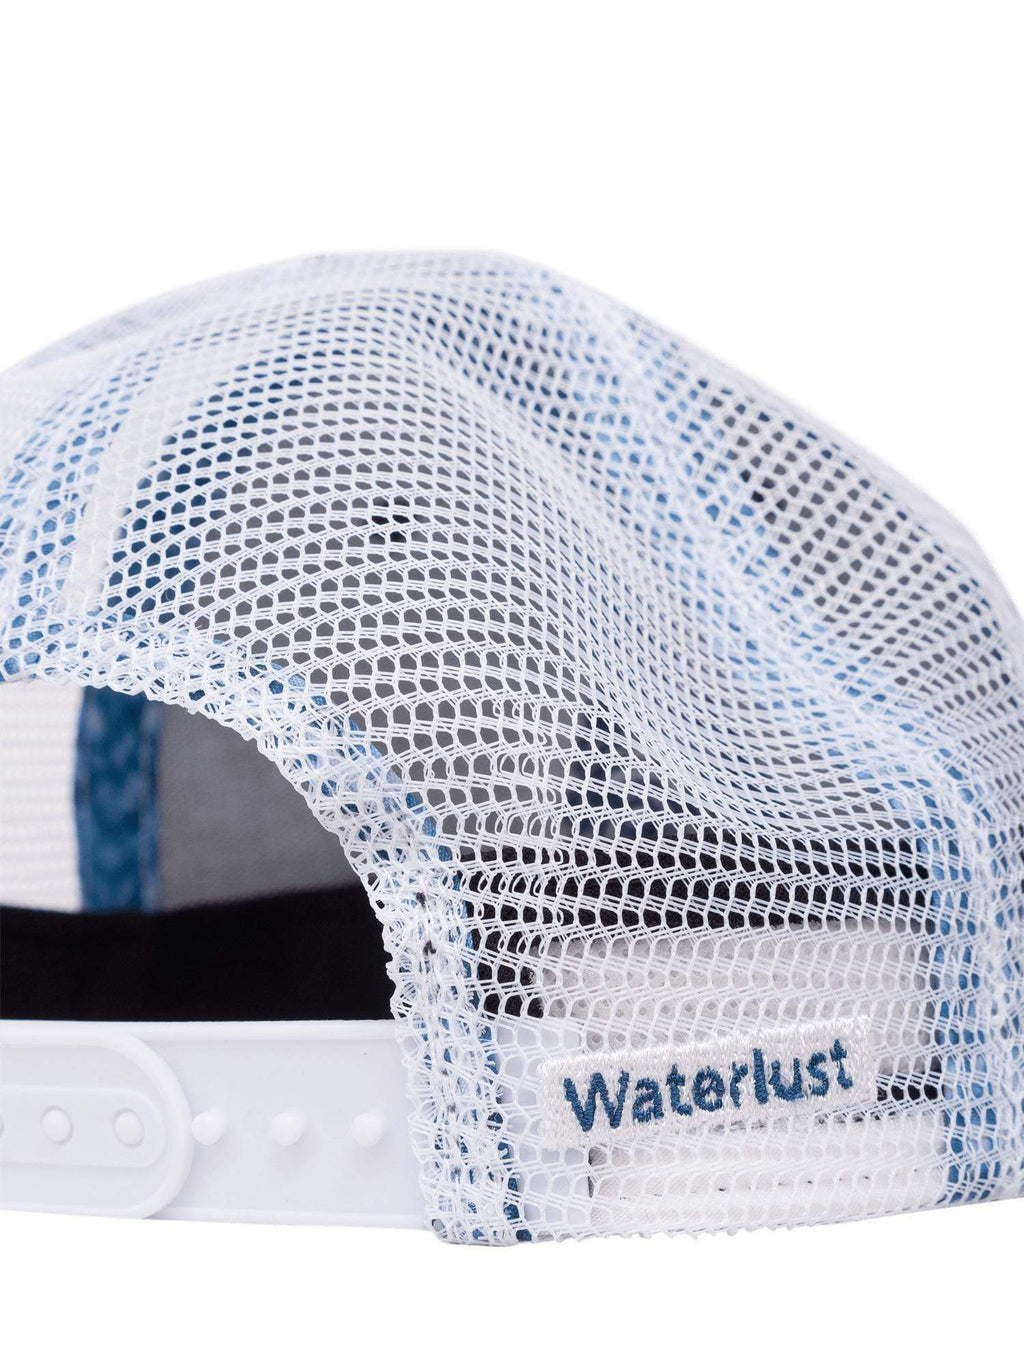 Close up view of the waterlust name embroidered on the back of a white mesh whale shark printed trucker cap hat